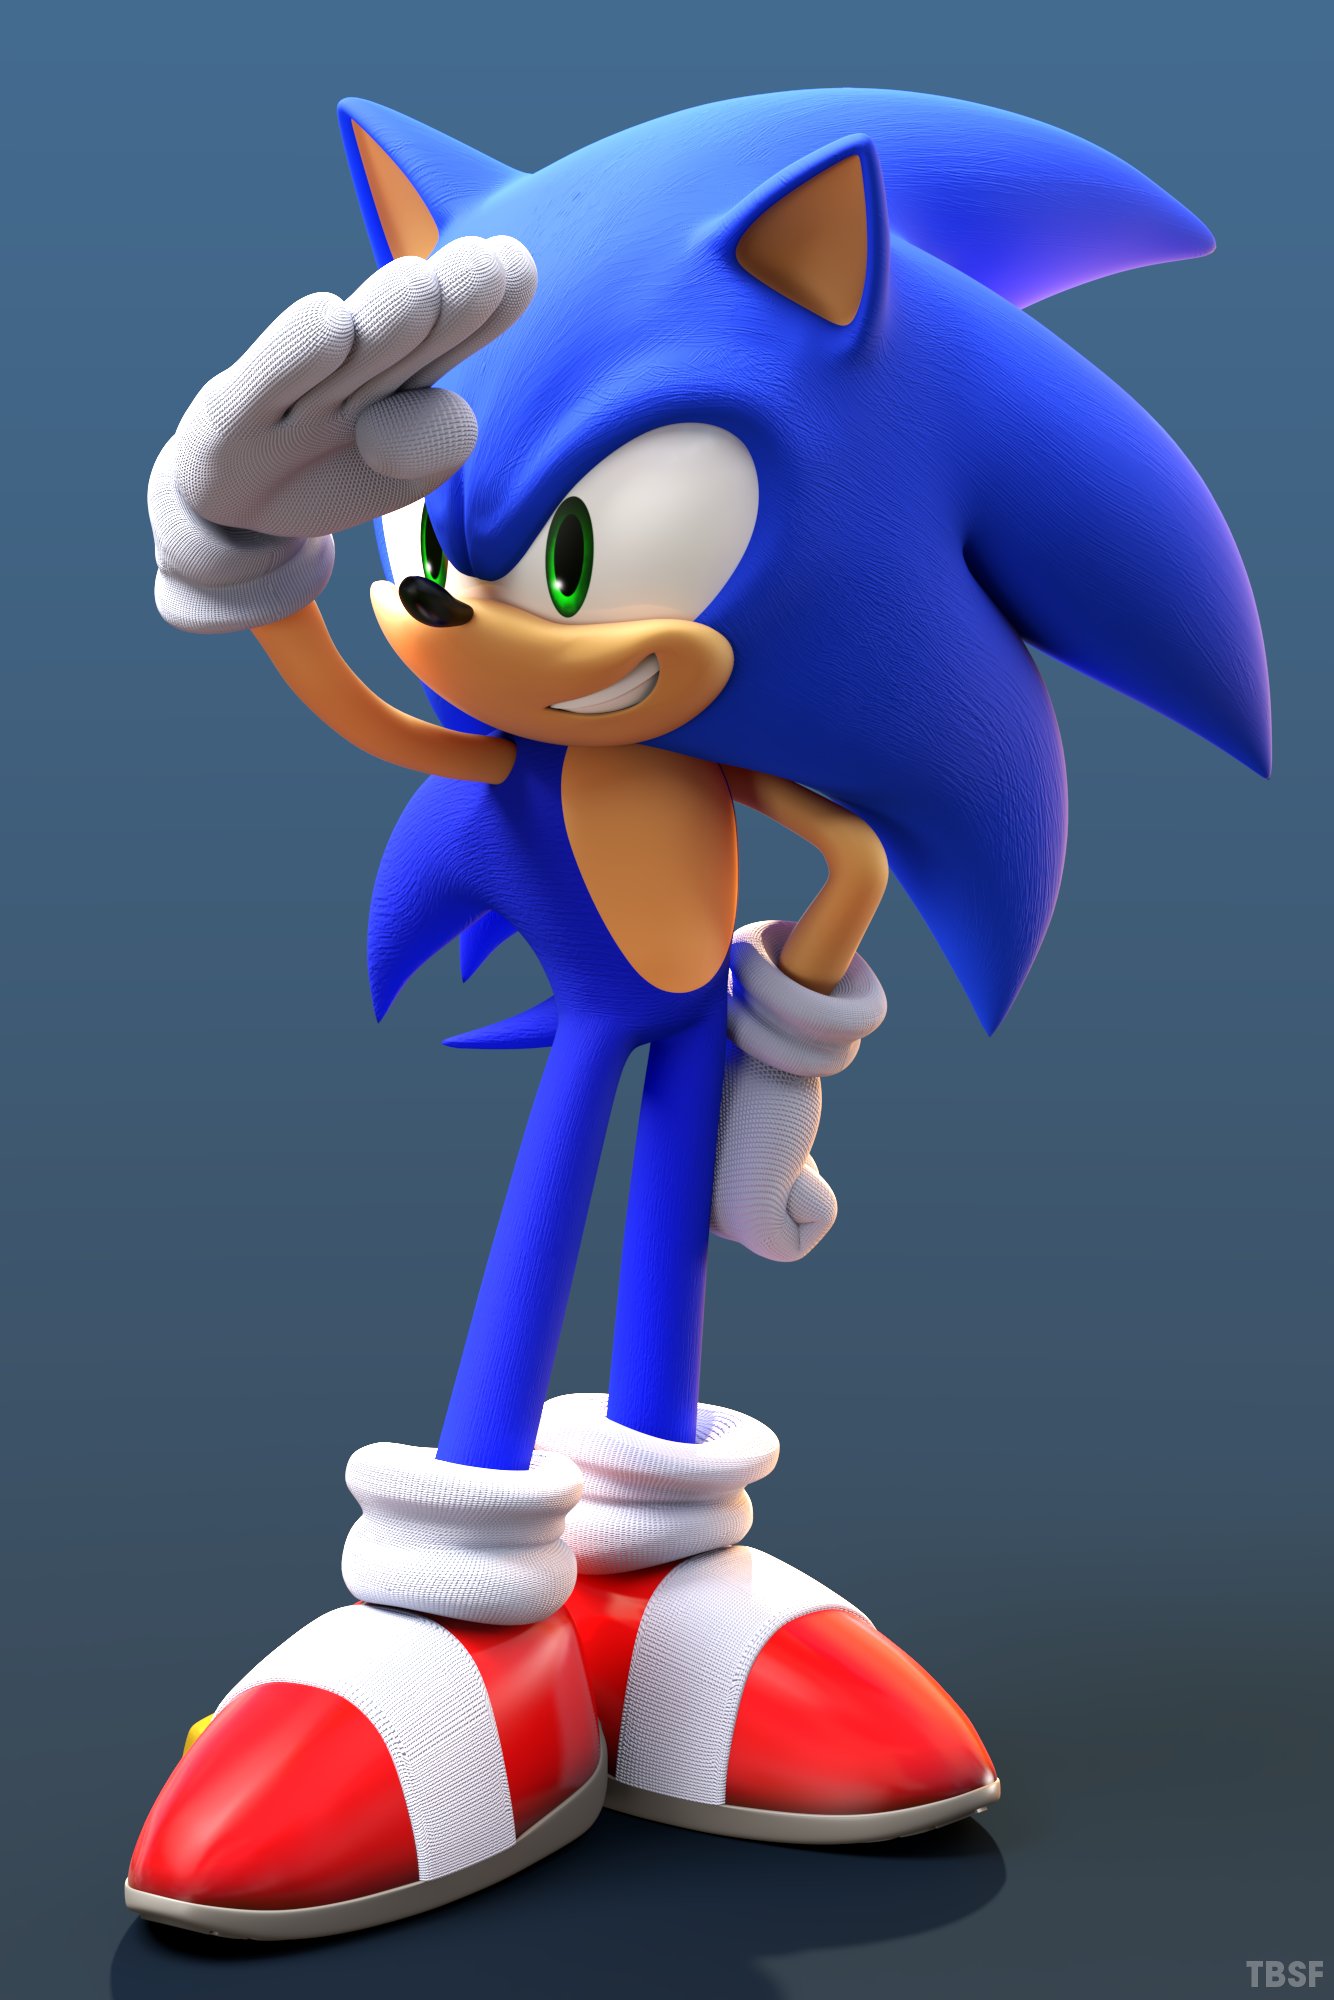 Favourite Sonic render(s)? Can be official or fan-made. I'll start